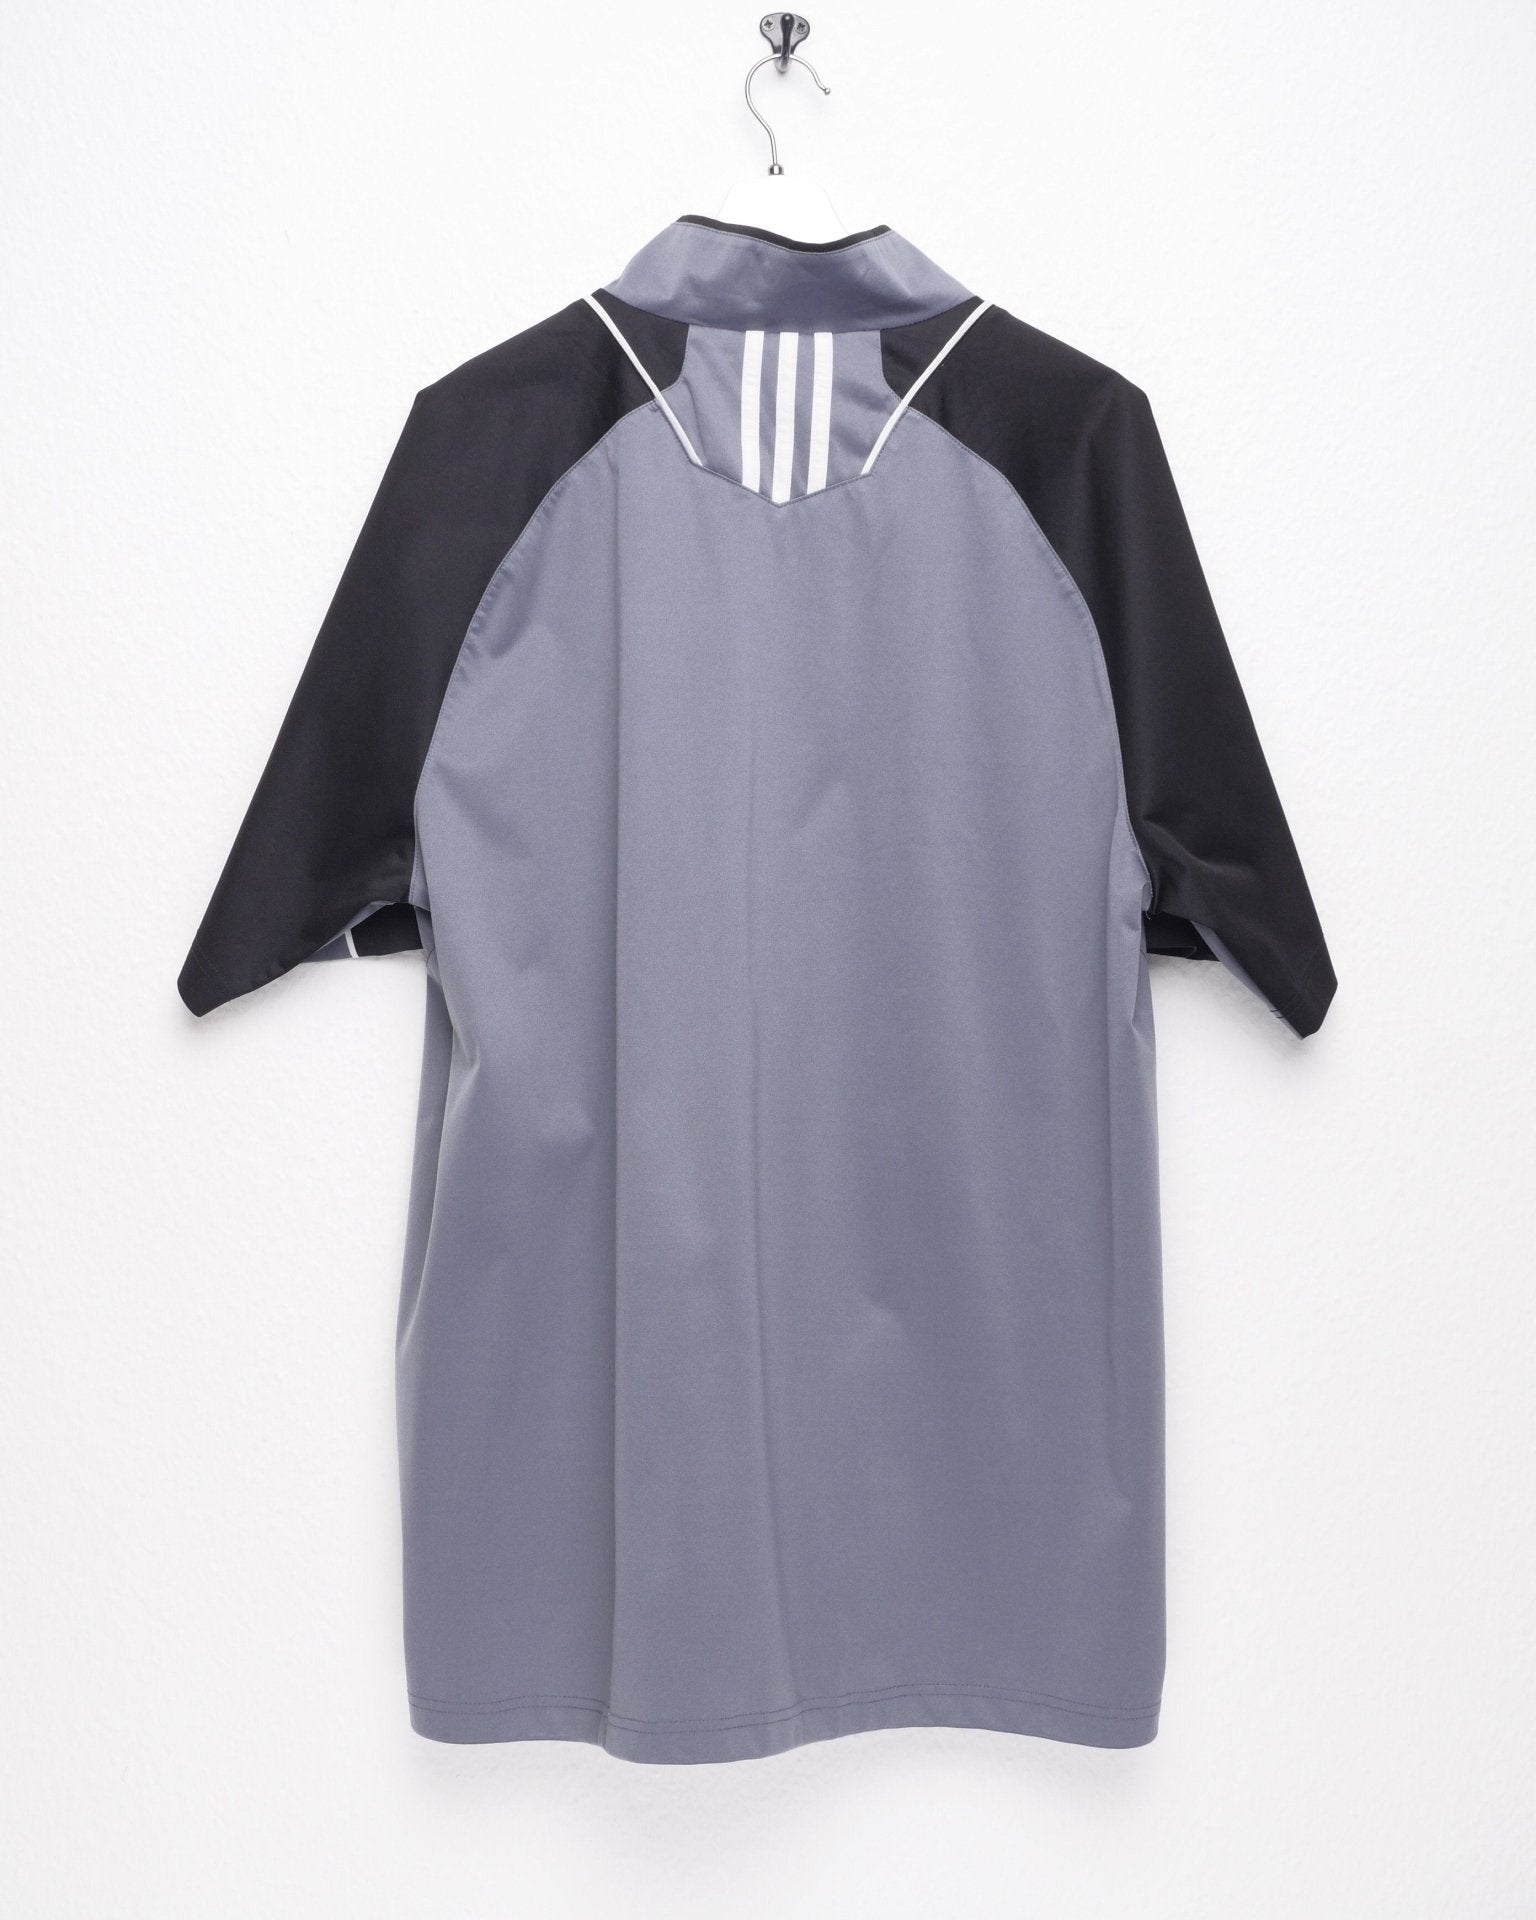 adidas embroidered Logo two toned Half Zip Jersey Shirt - Peeces